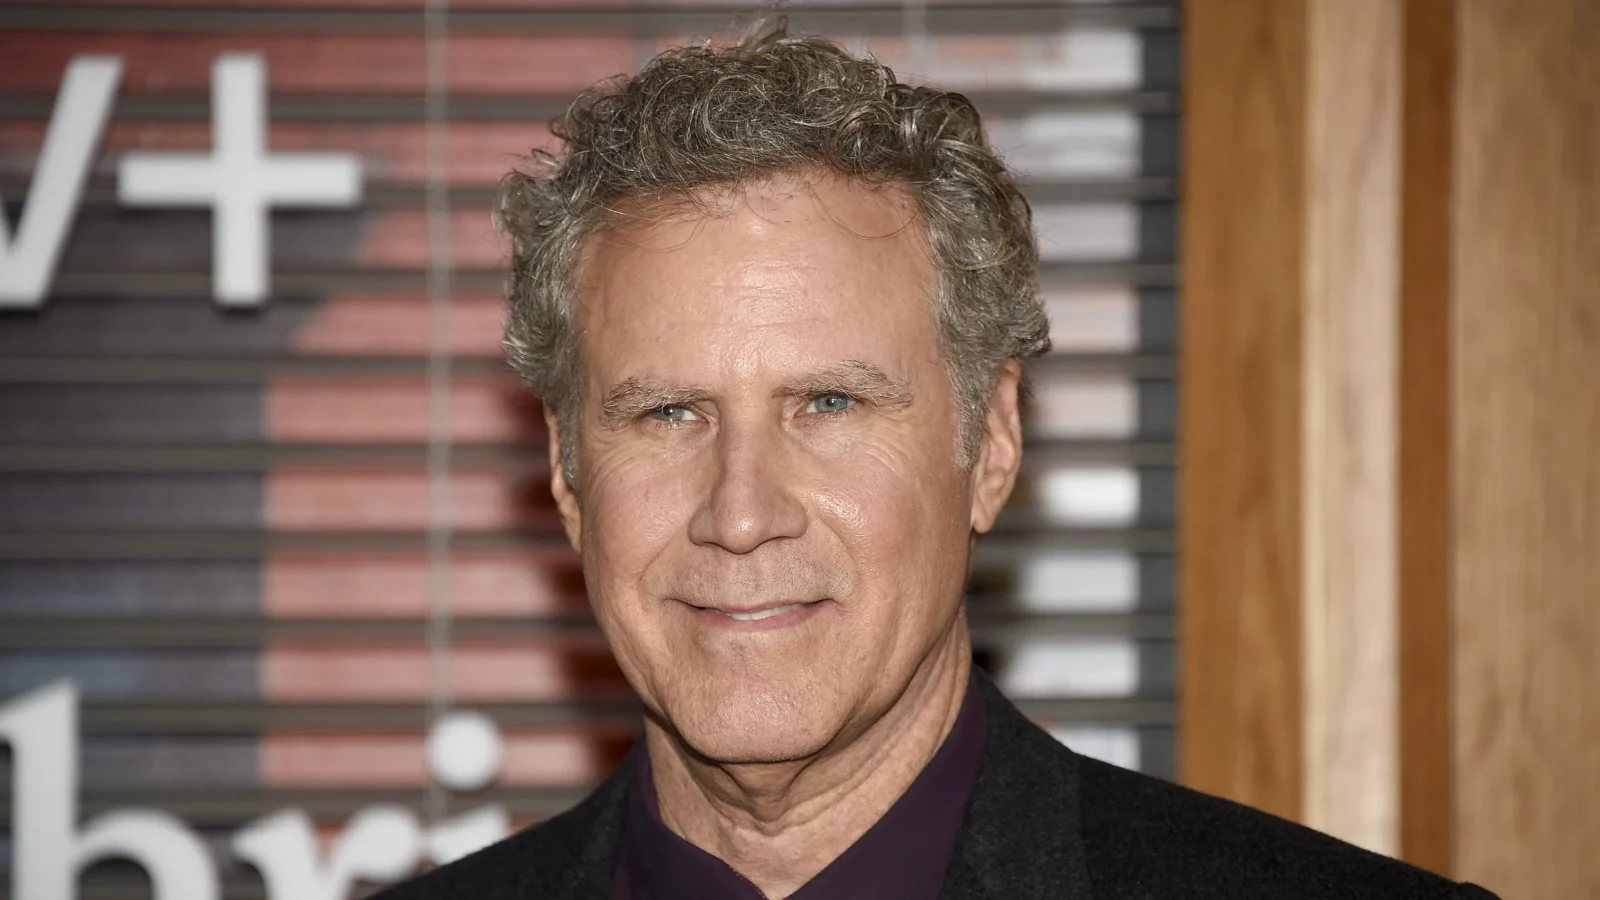 Will Ferrell Biography Height Weight Age Movies Wife Family Salary Net Worth Facts More